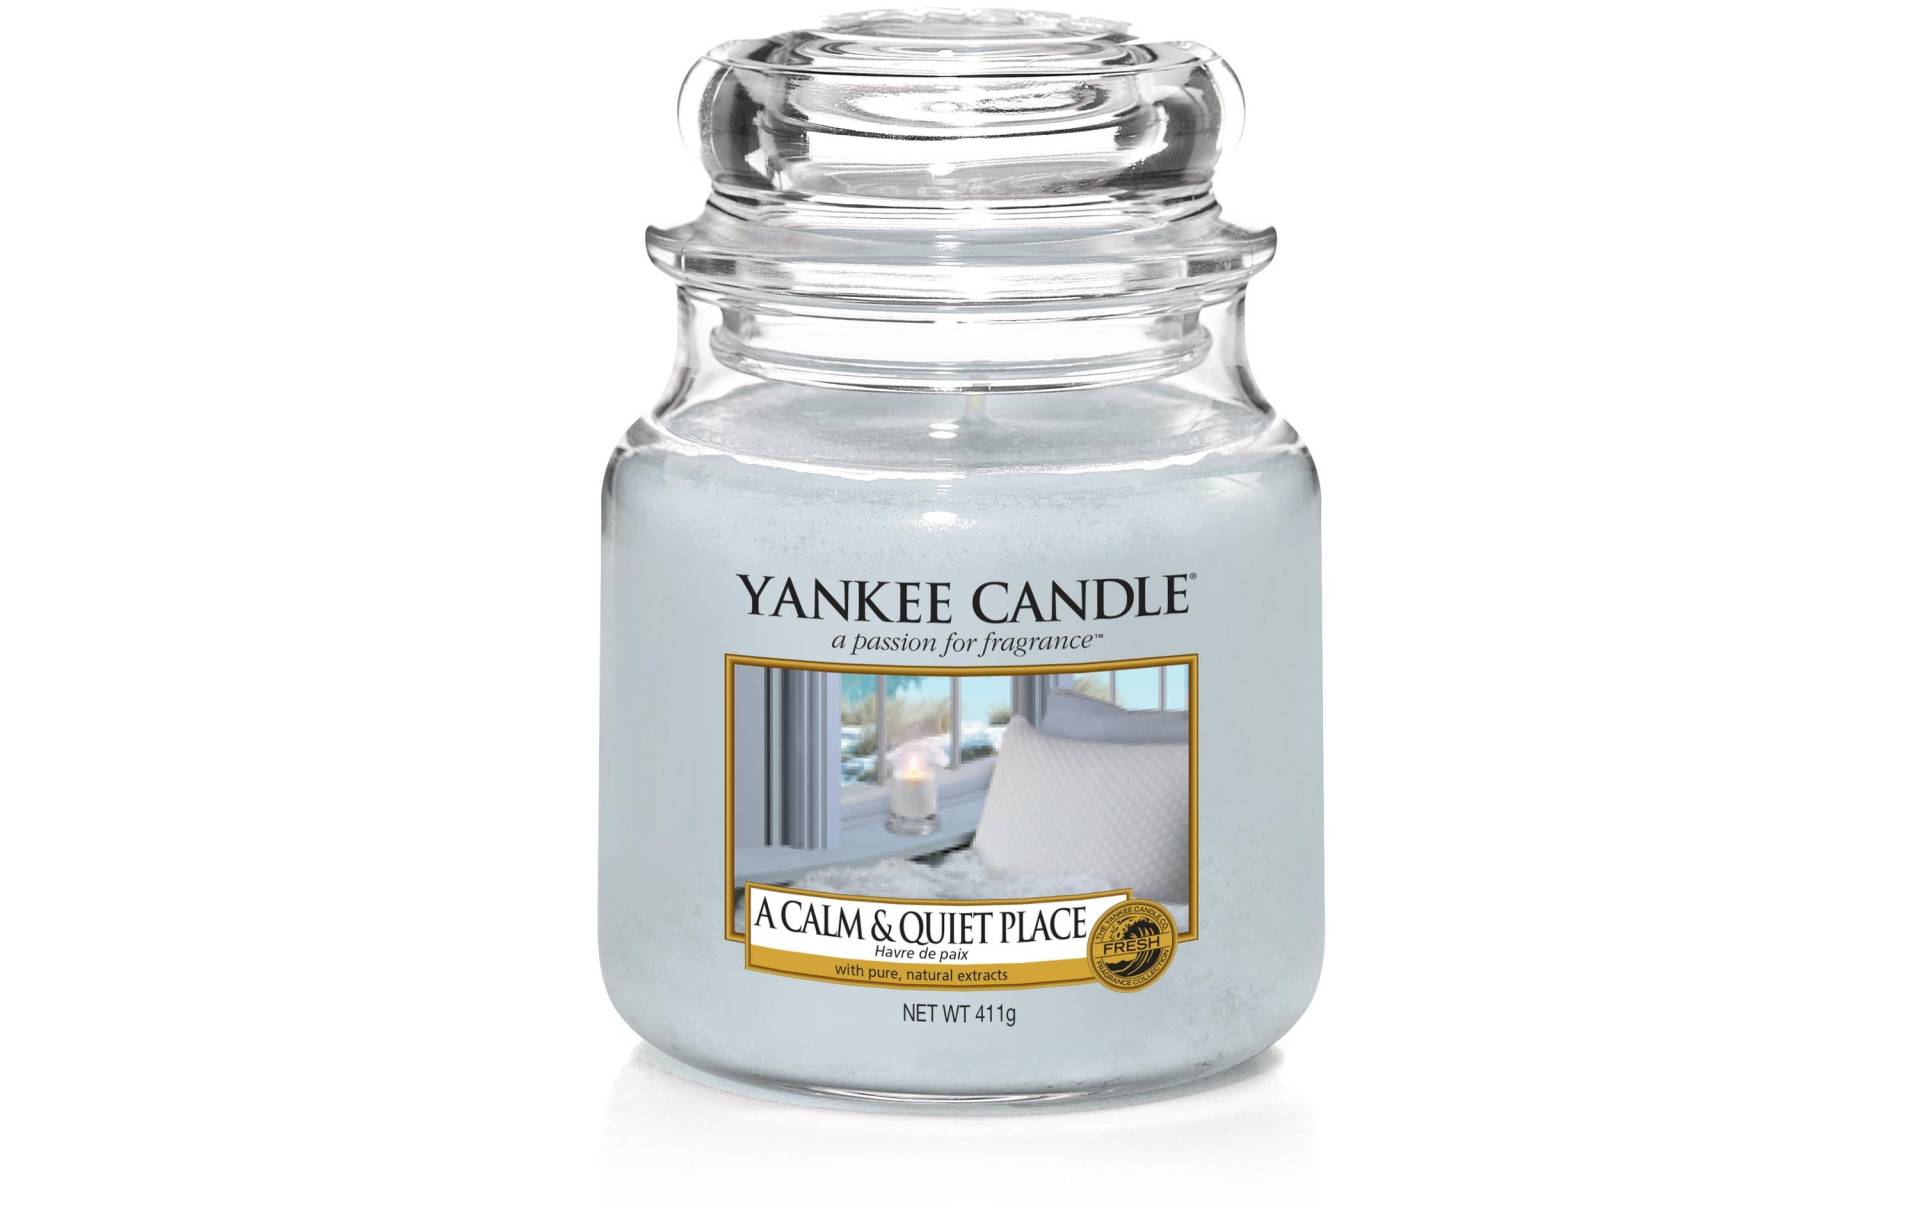 Yankee Candle Duftkerze »A Calm & Quiet Place« von Yankee Candle